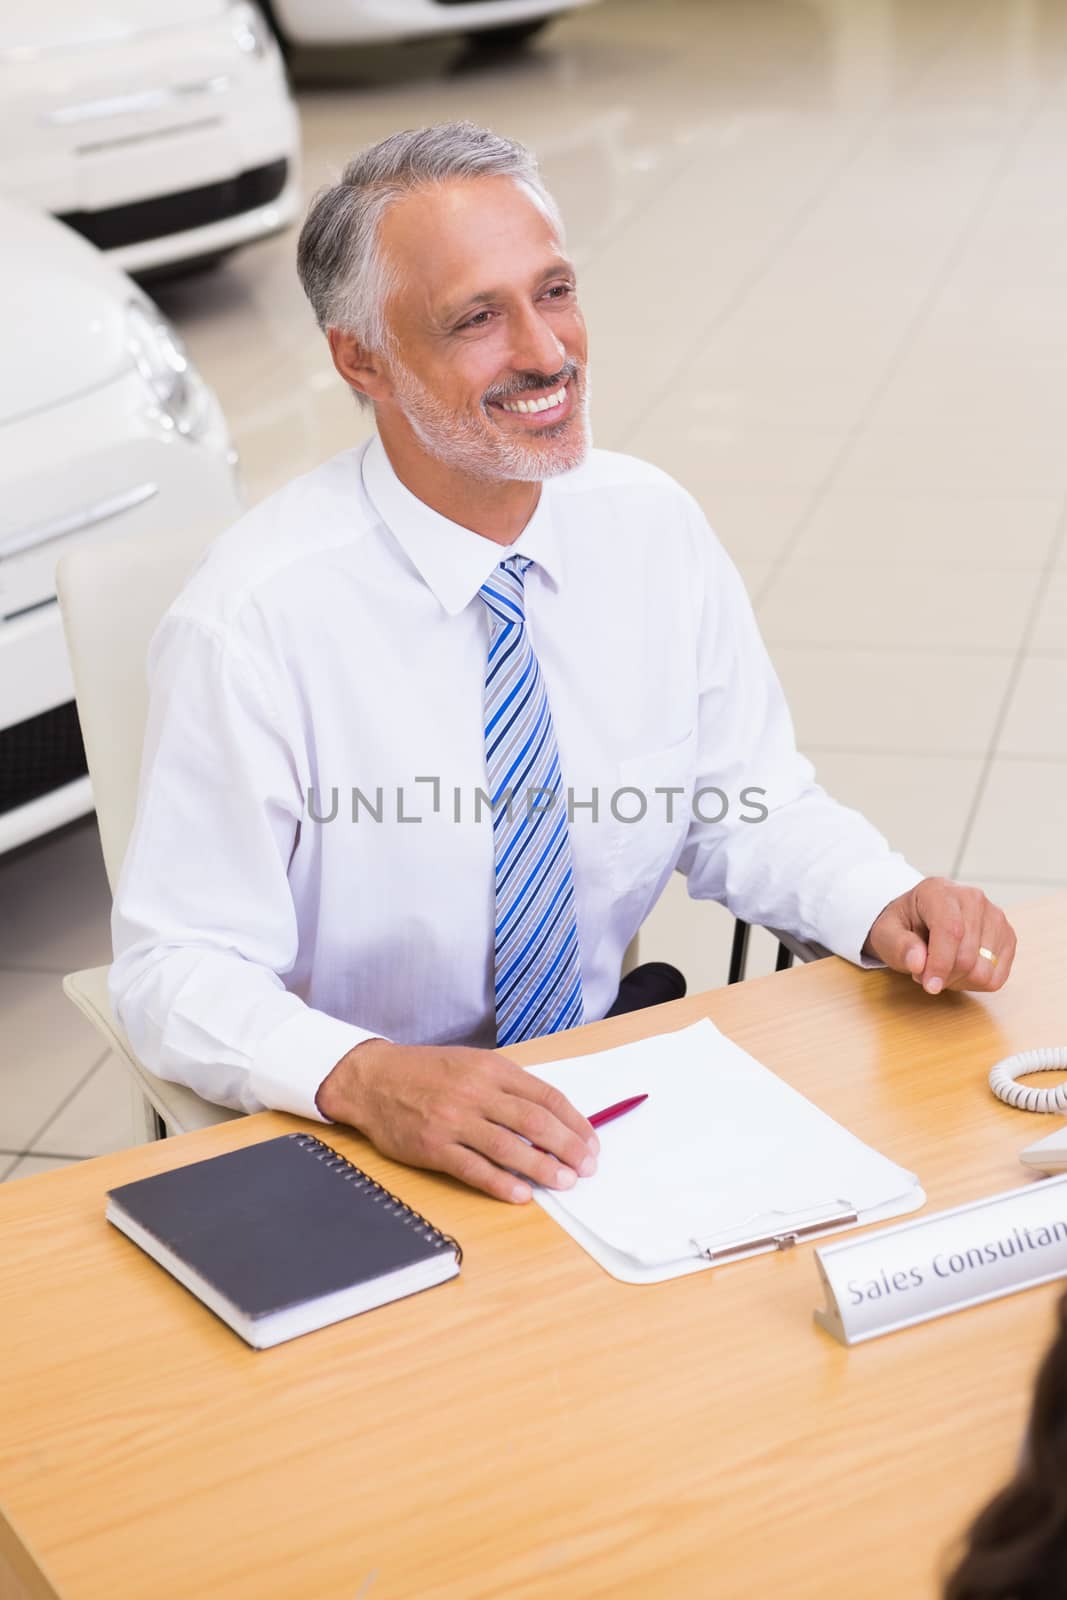 Happy businessman working at his desk at new car showroom